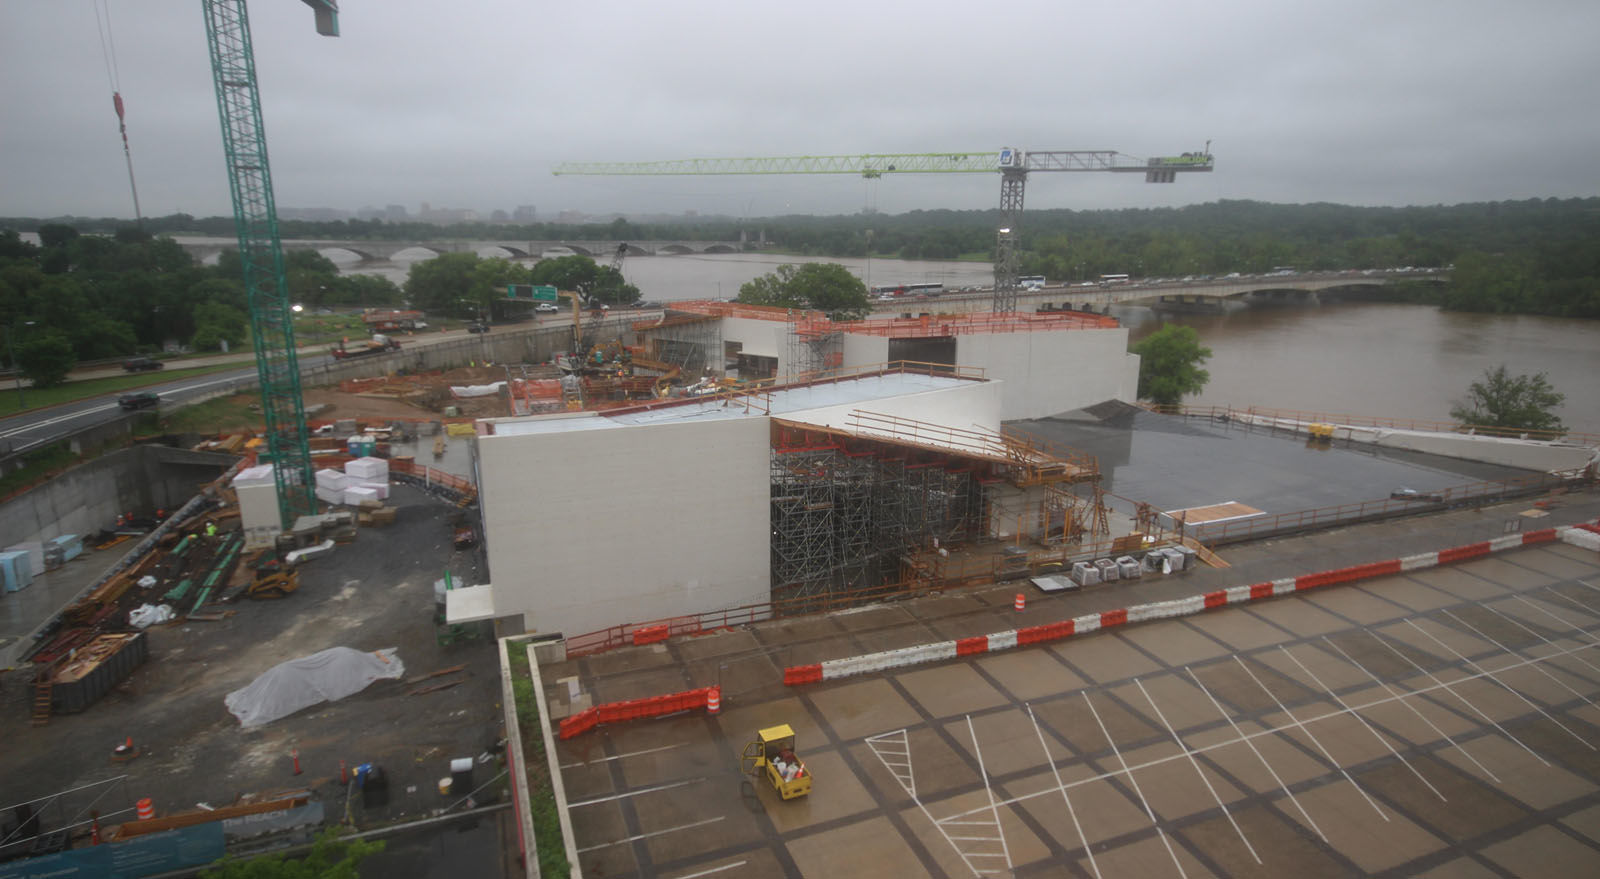 A look at the progress made on the construction of the Kennedy Center's expansion project on May 18, 2018. (Courtesy the Kennedy Center)